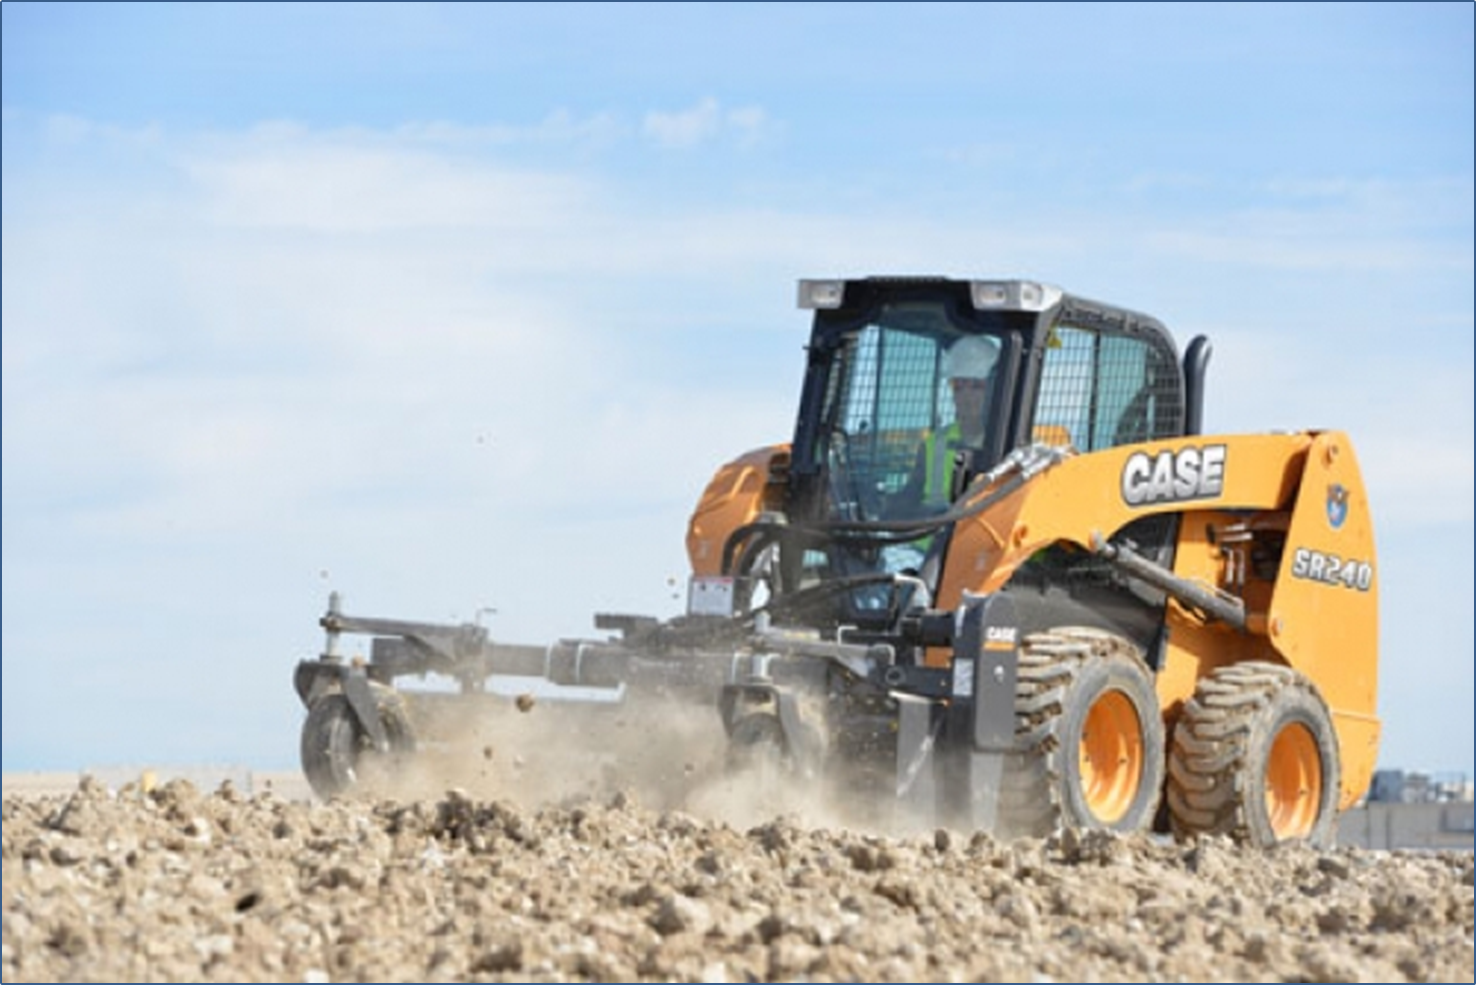 CASE Construction Equipment introduces the new SR240 and SV280 Tier 4 Final skid steers